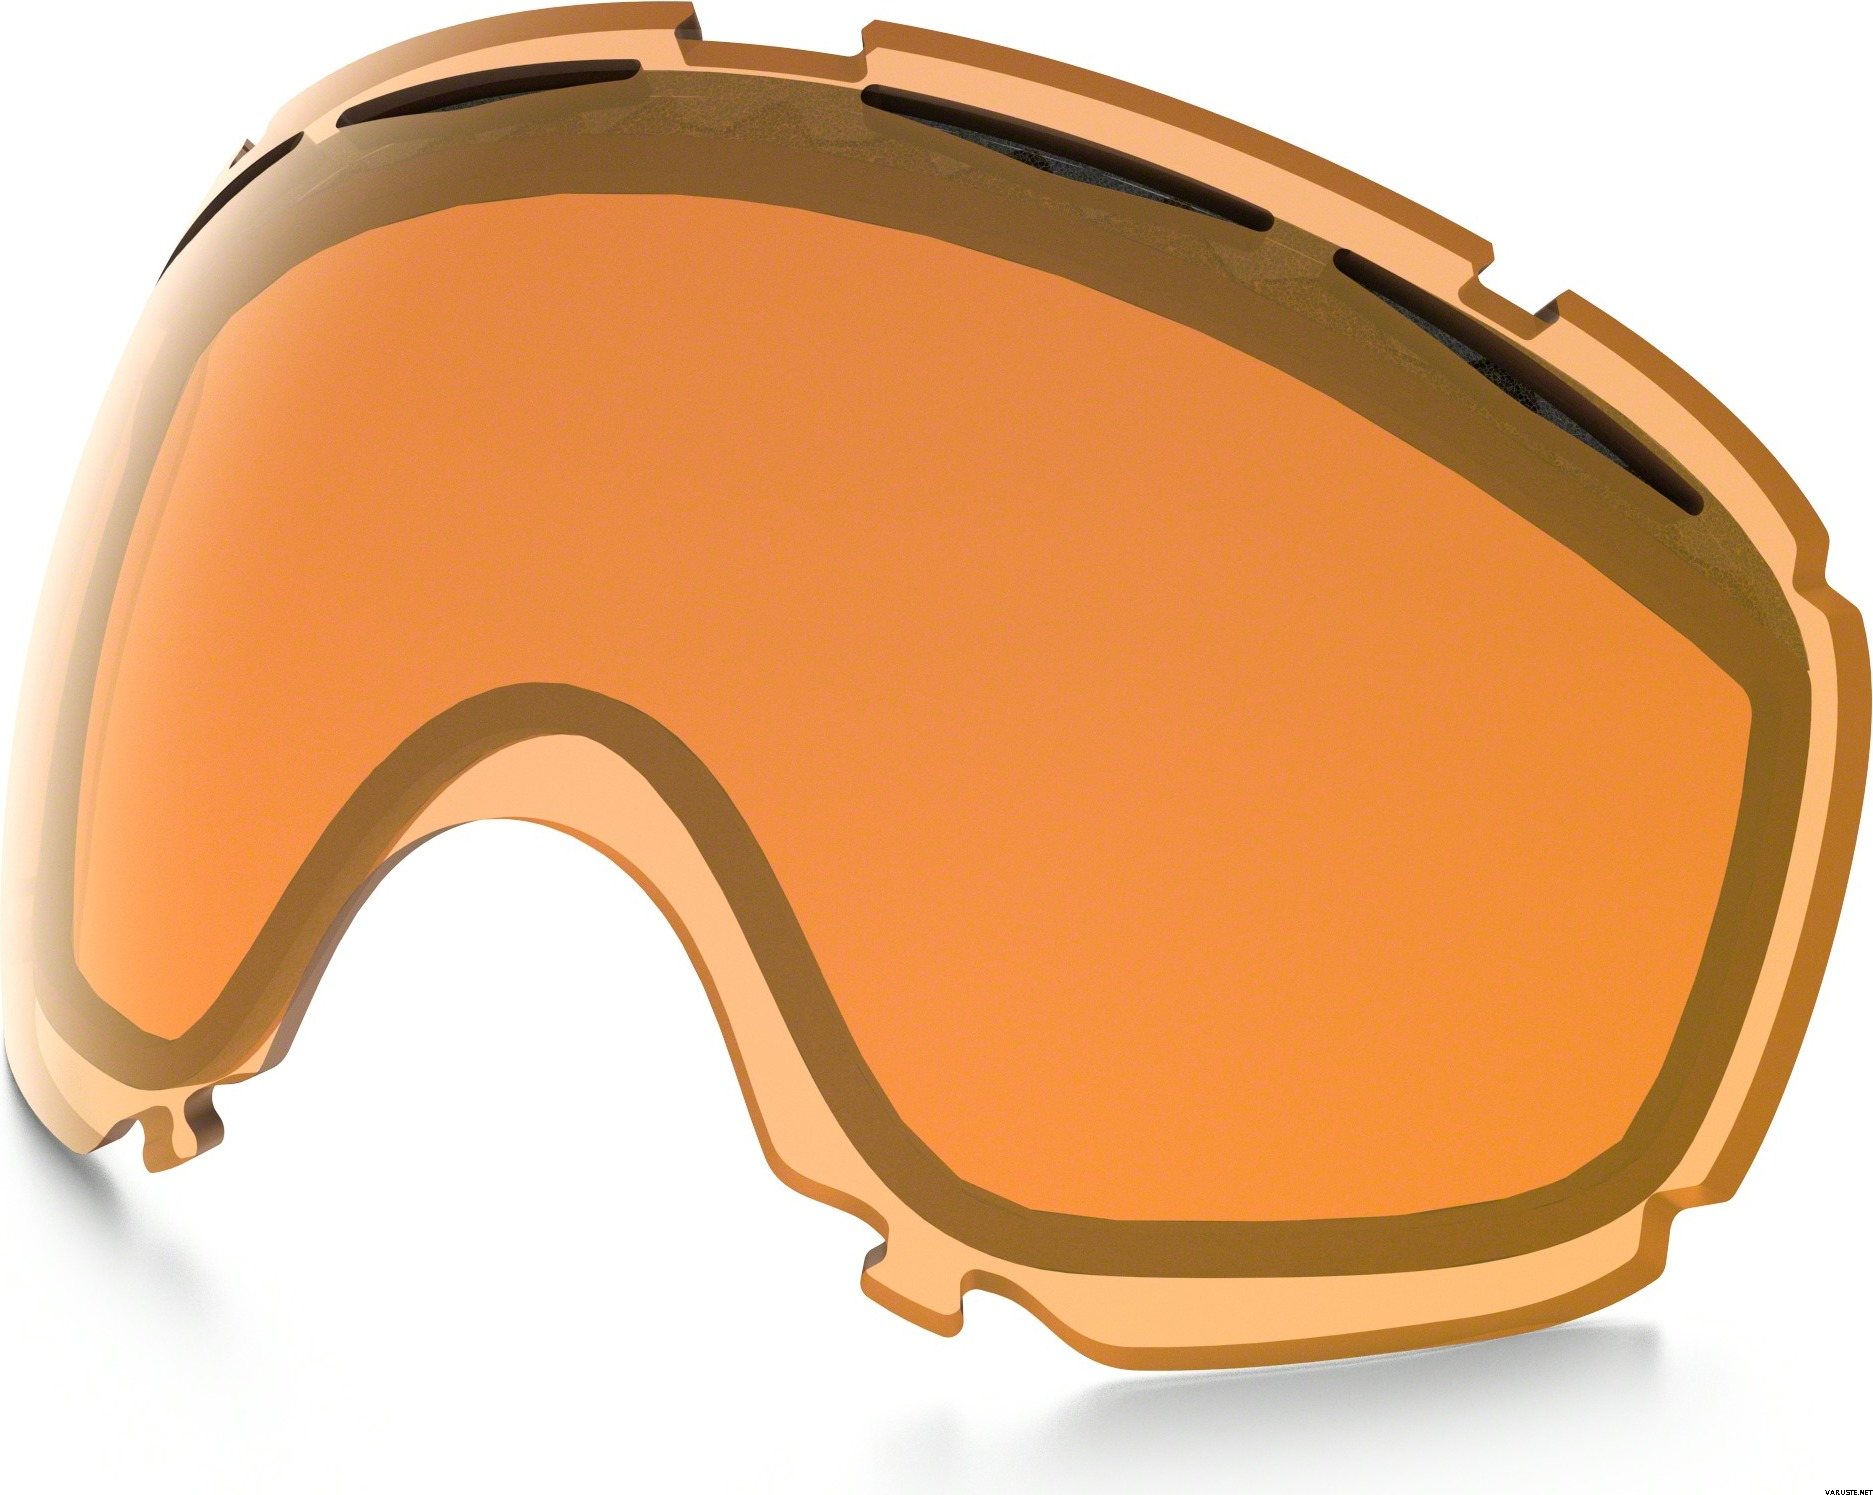 oakley canopy replacement lens